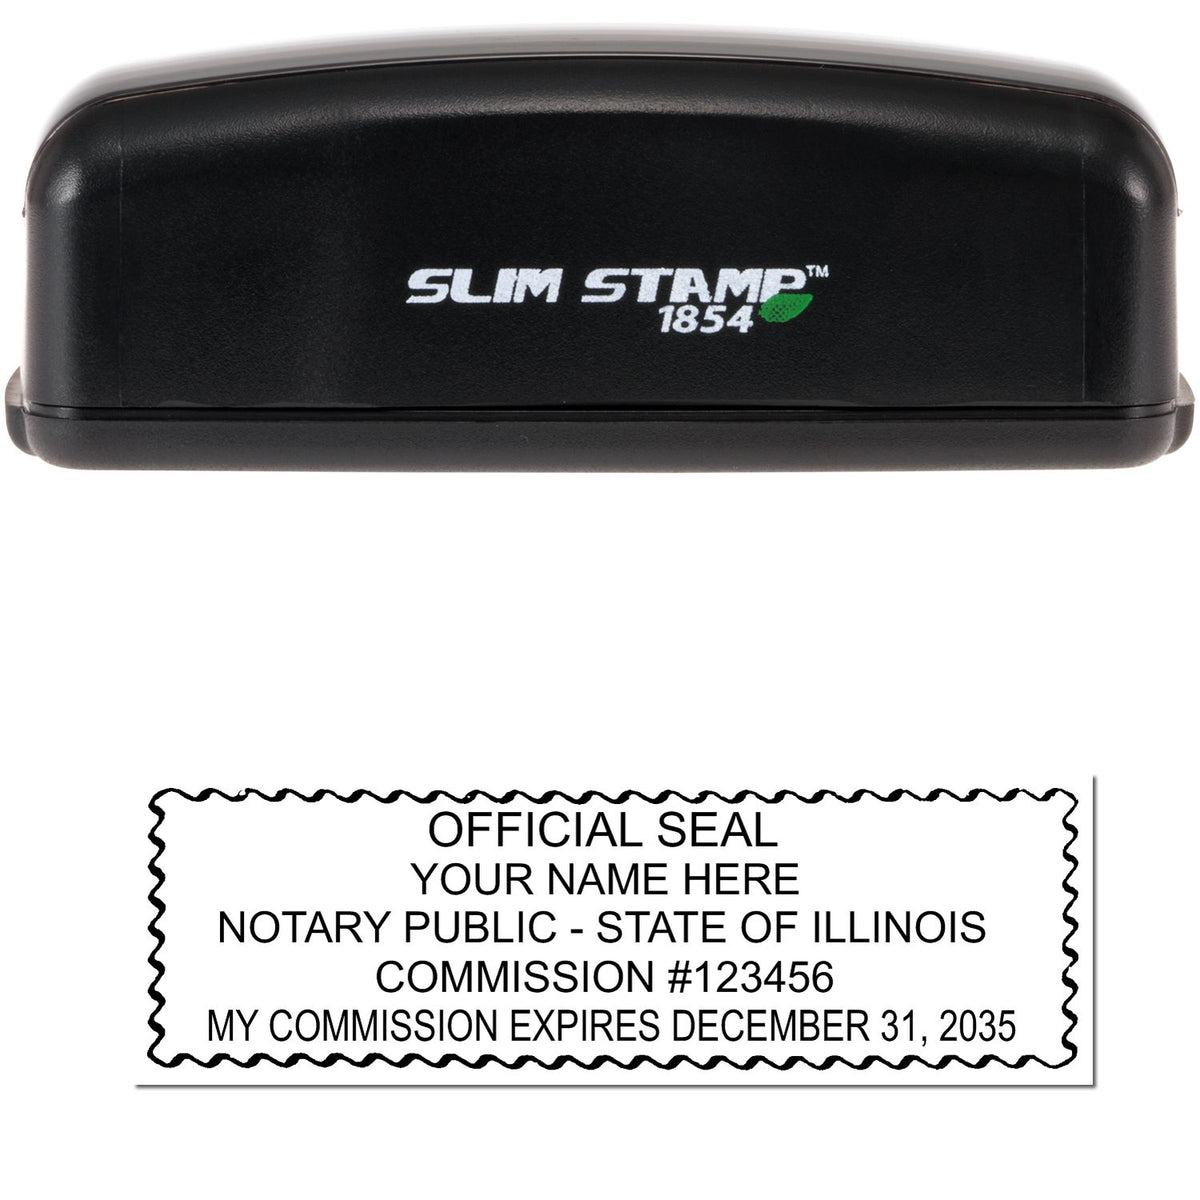 The main image for the Slim Pre-Inked Rectangular Notary Stamp for Illinois depicting a sample of the imprint and electronic files